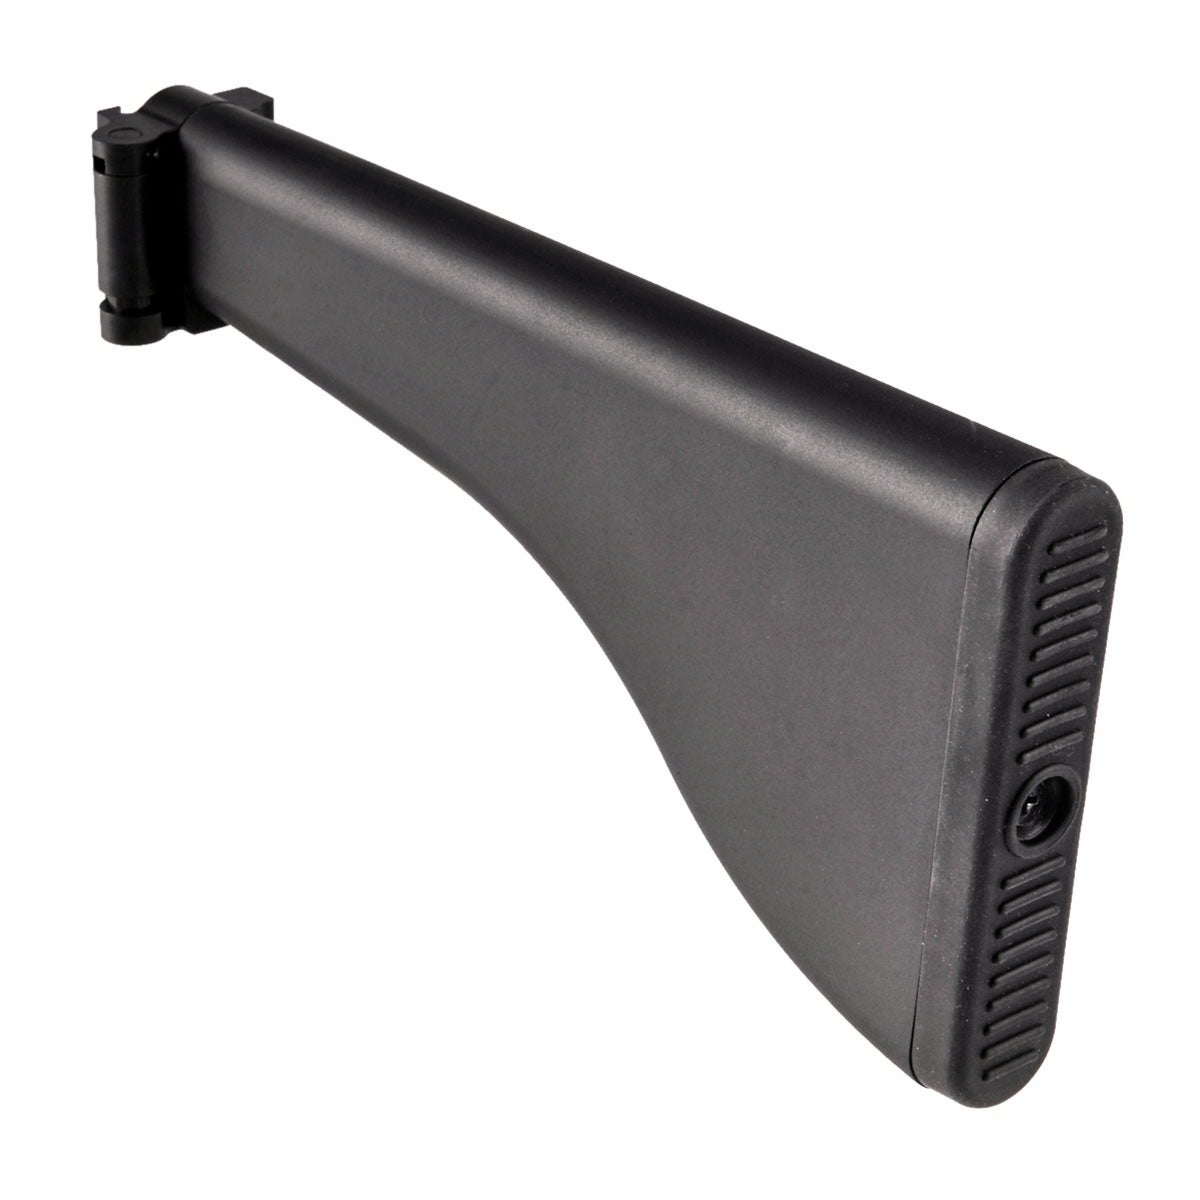 NEW BRN-180 Classic Stock From Brownells (2)